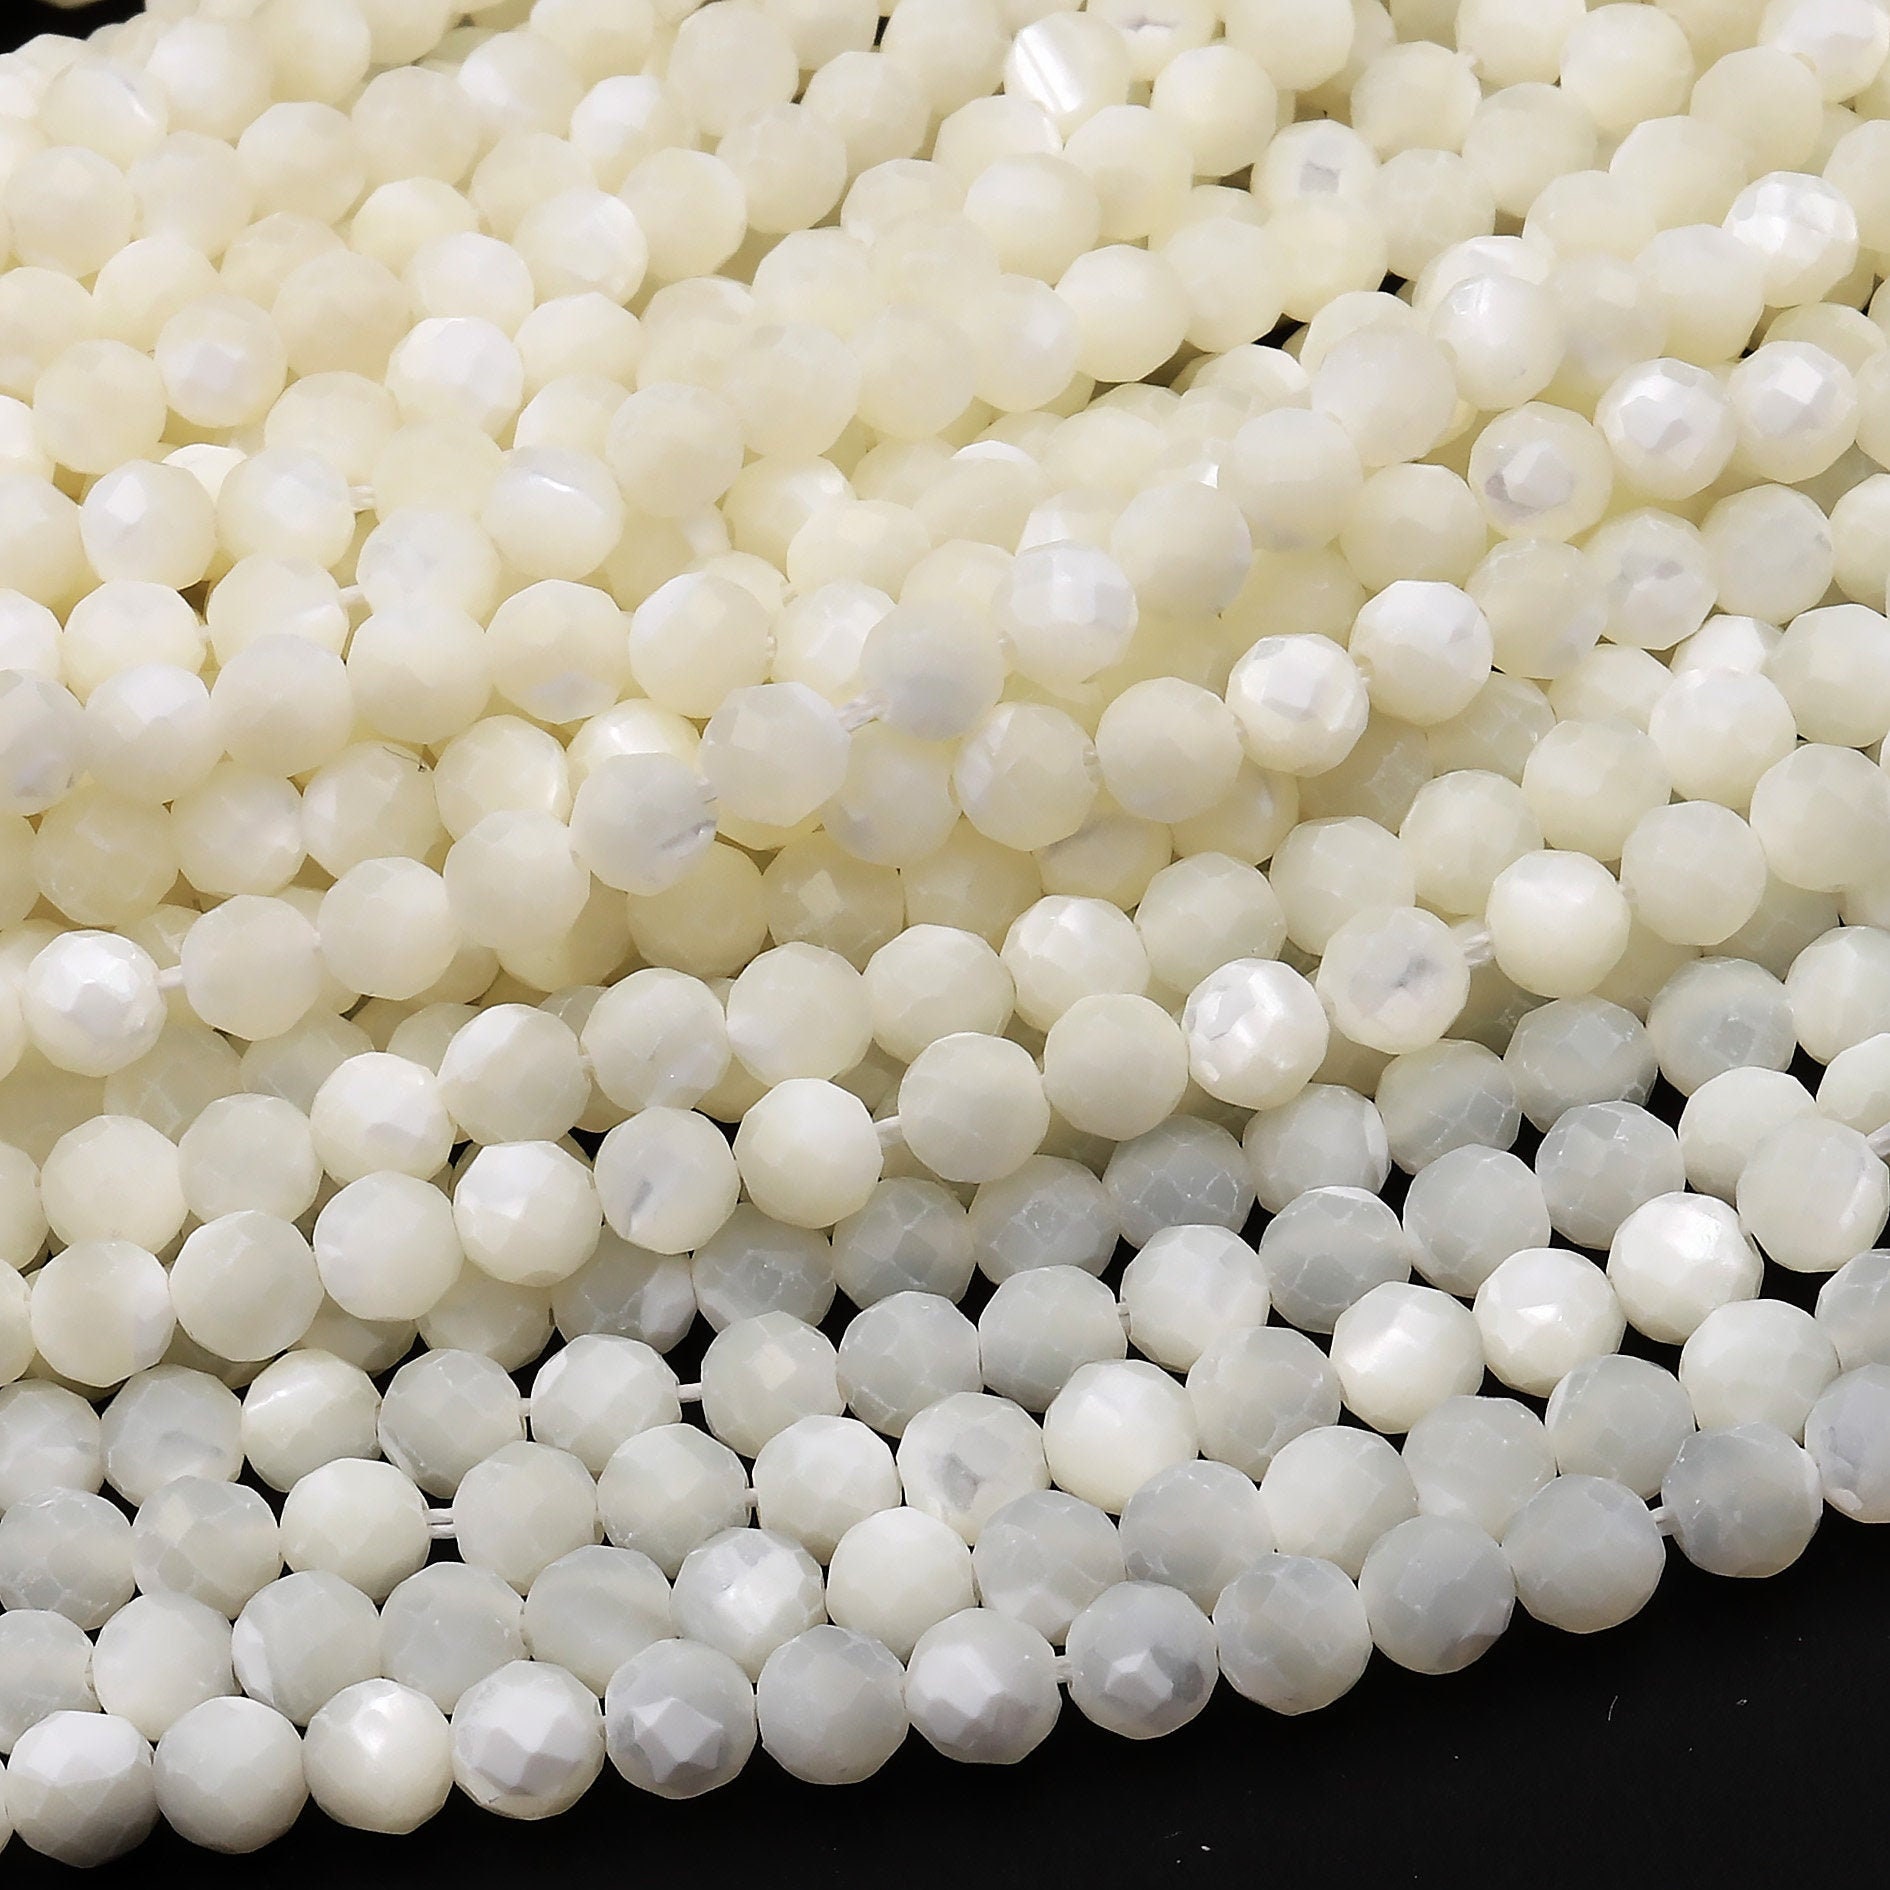 3mm Smooth Round, White MOP (Mother of Pearl) Beads (16 Strand)